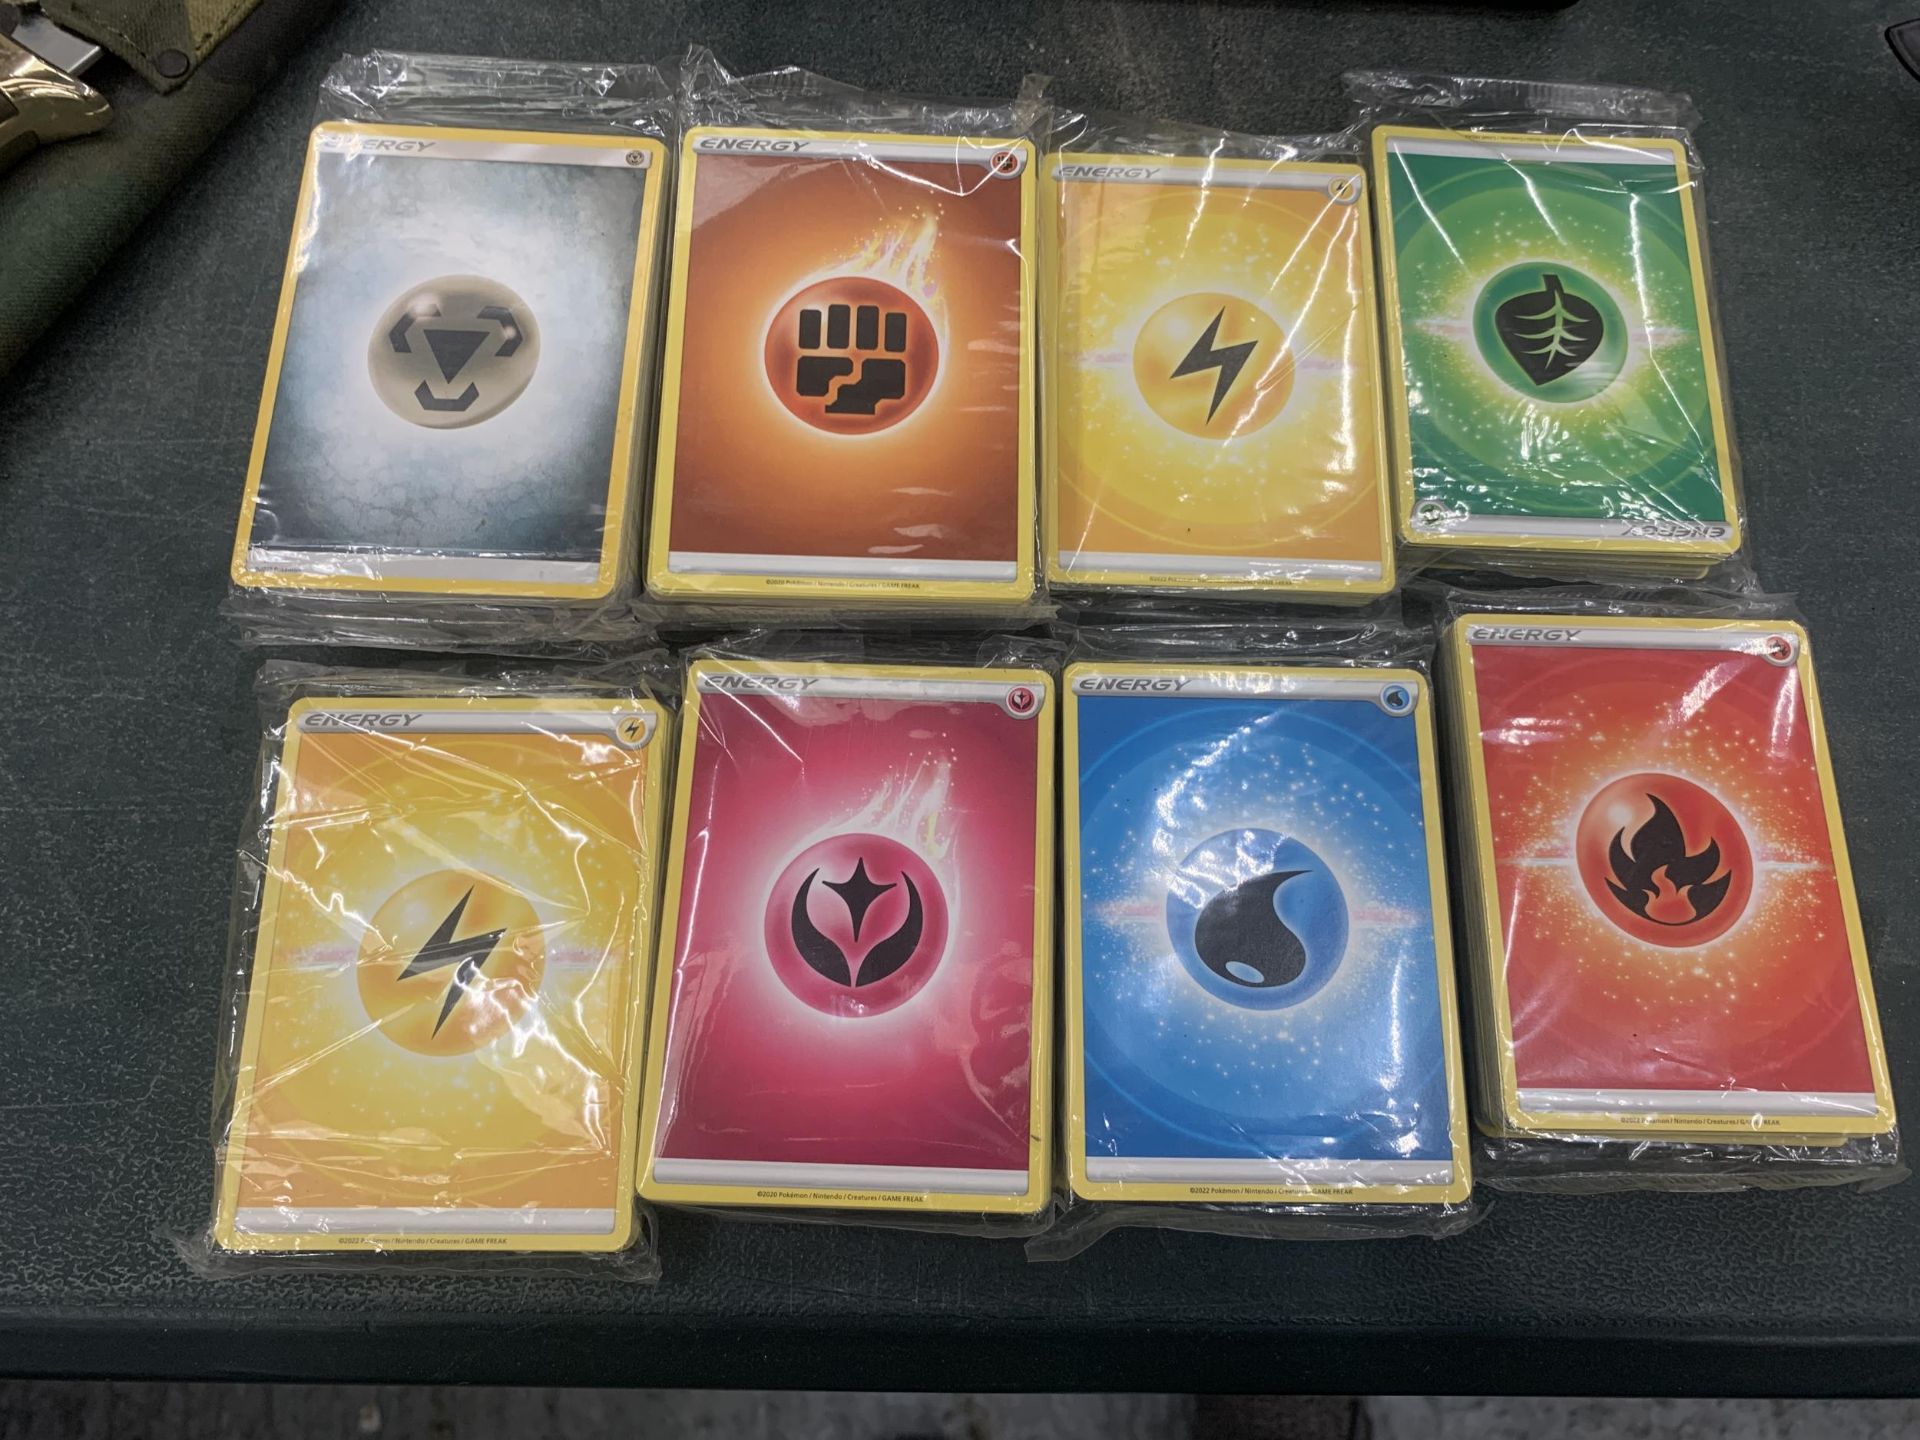 A COLLECTION OF 450+ POKEMON ENERGY CARDS, SEALED IN BAGS FROM ELITE TRAINER BOXES, ETC